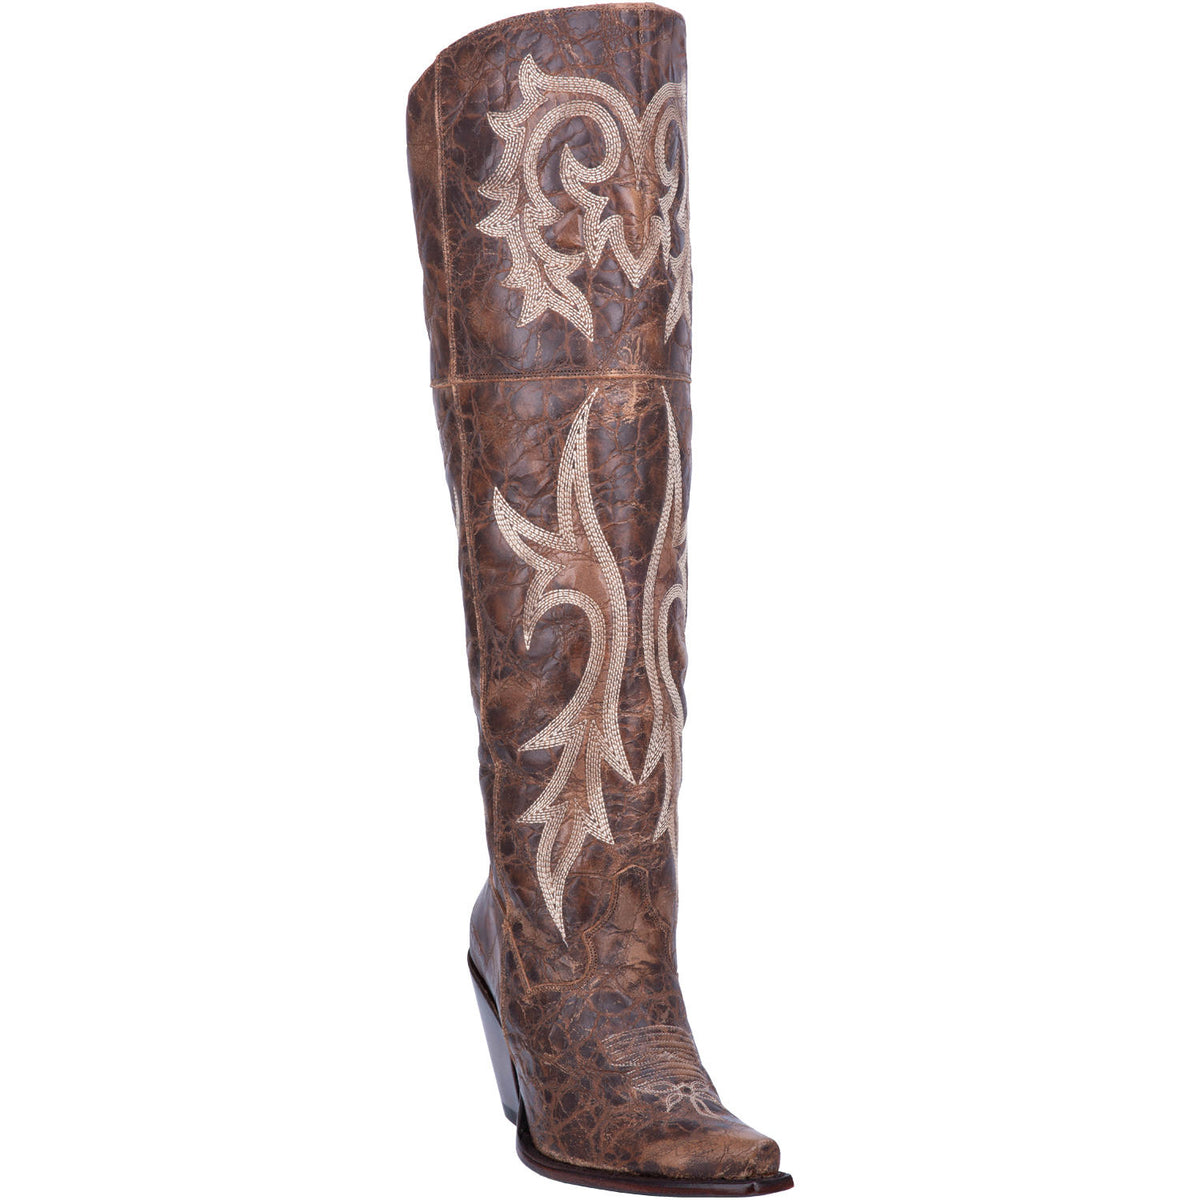 JILTED LEATHER BOOT Cover